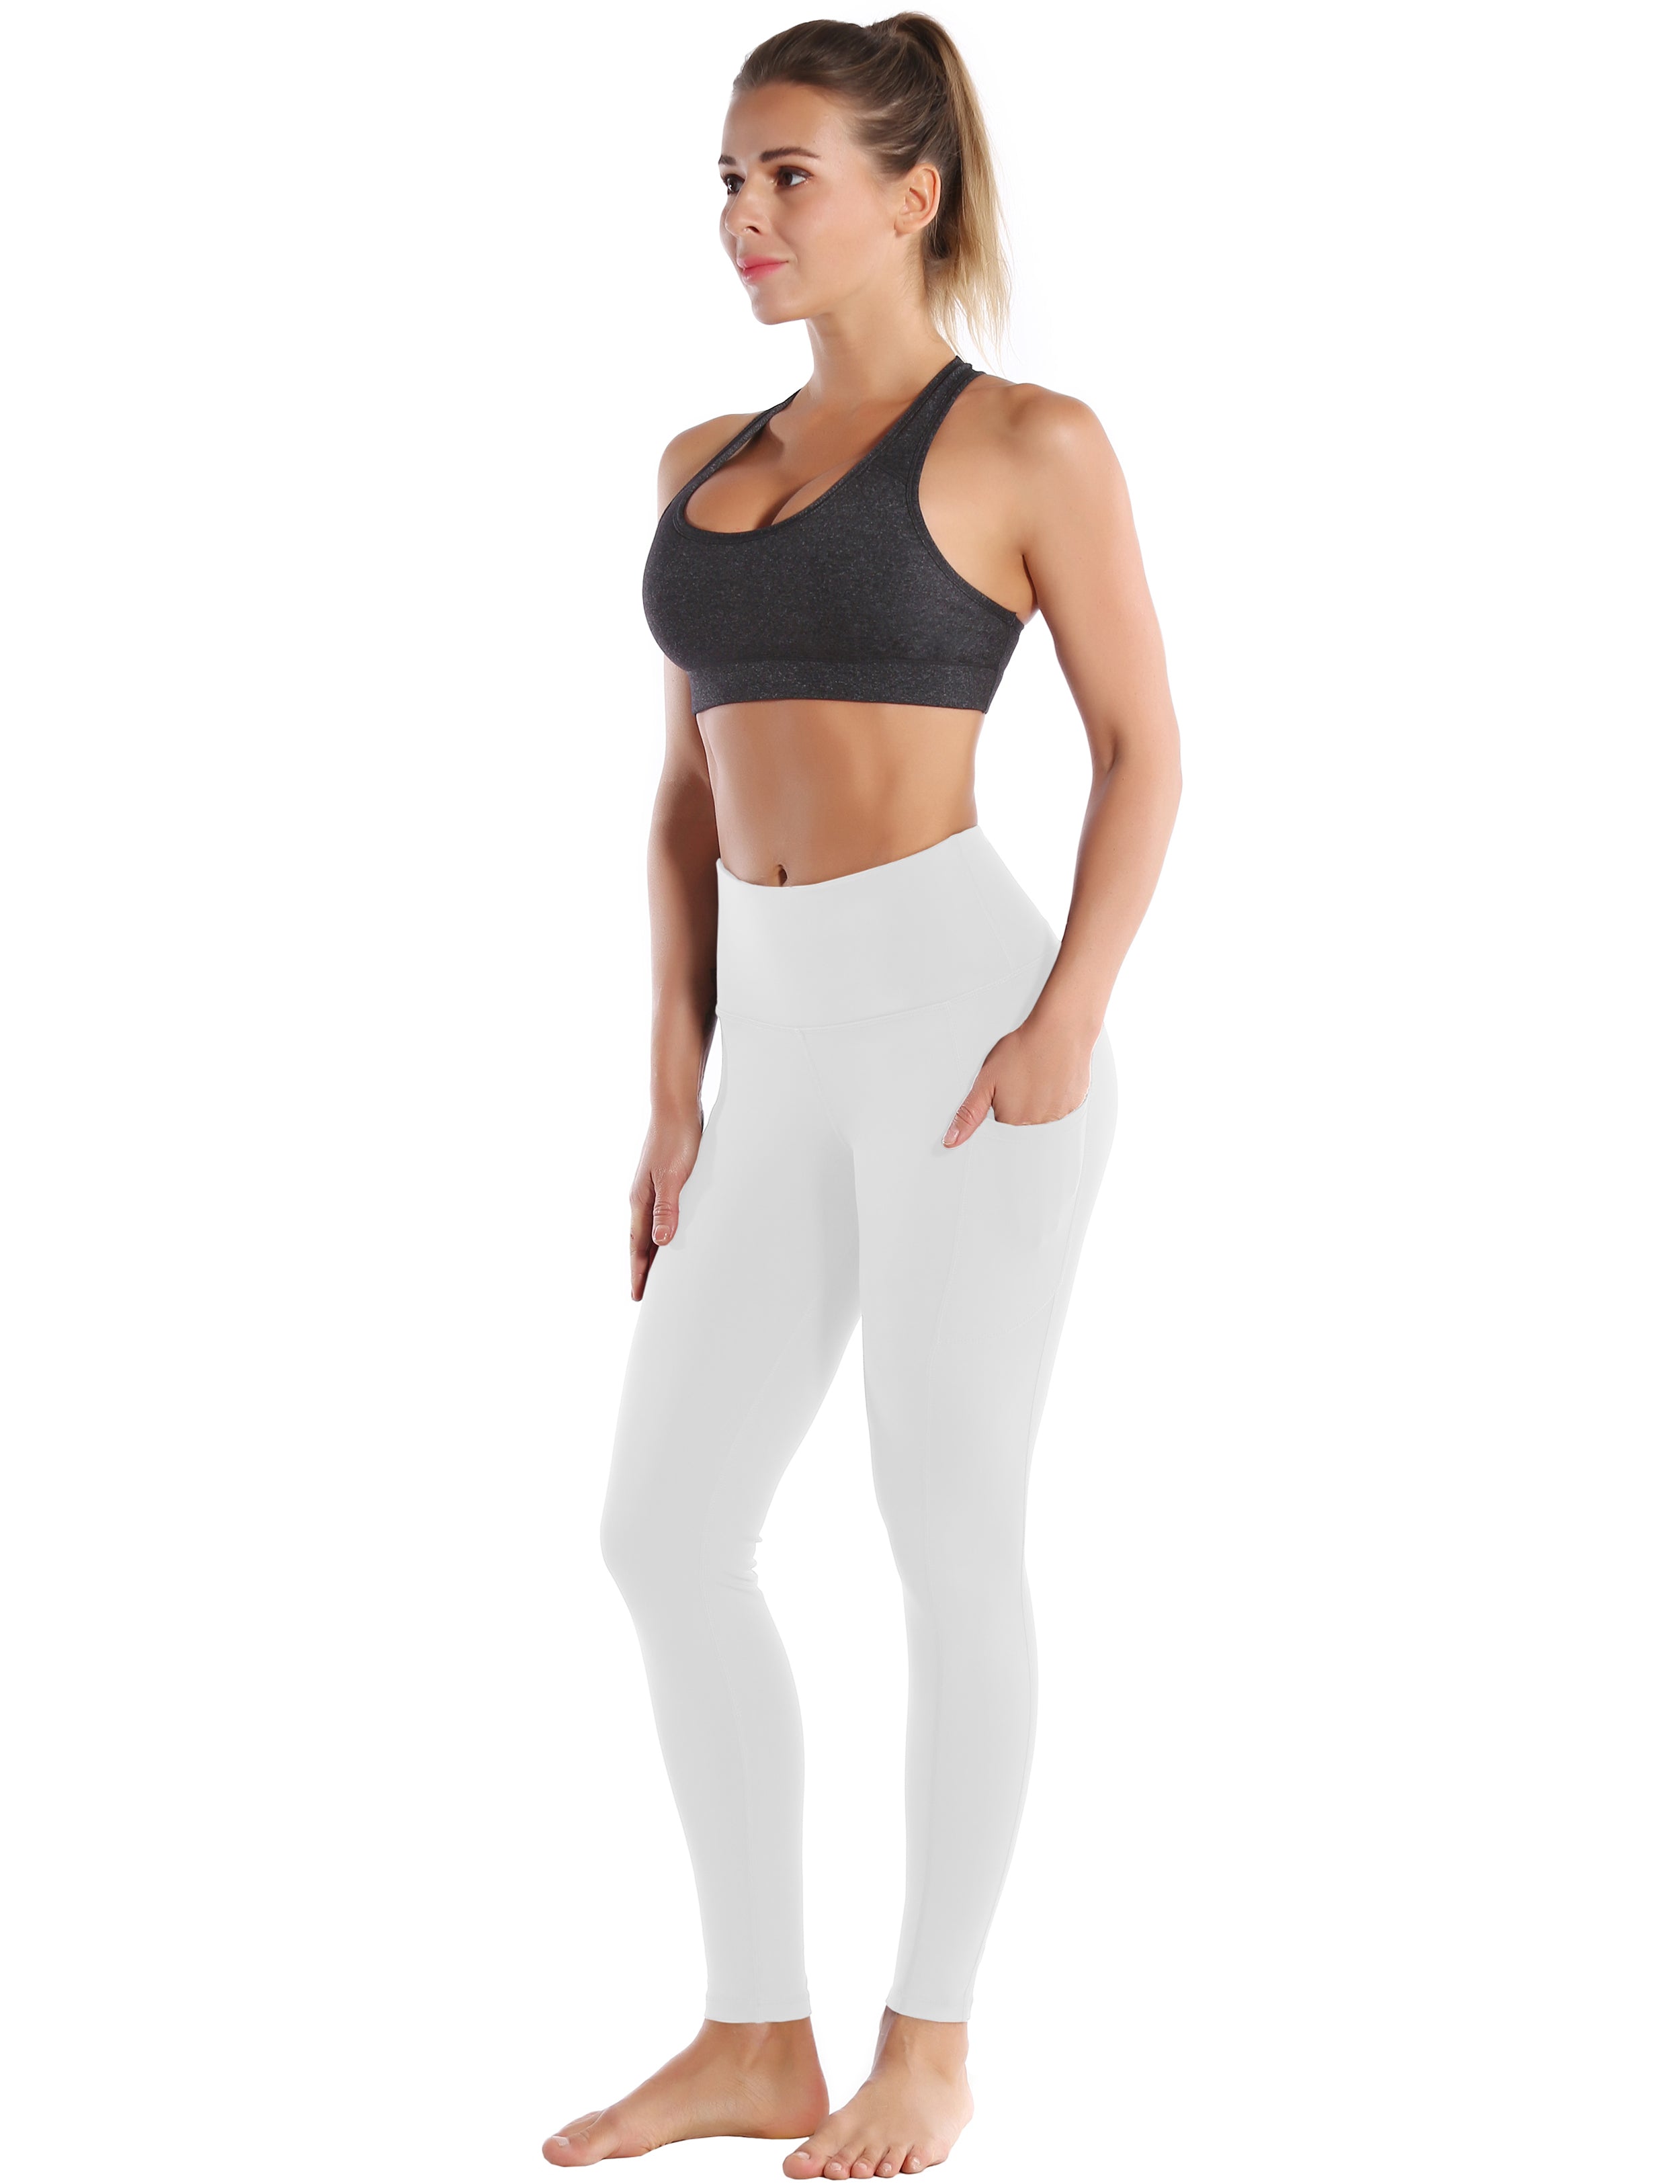 Hip Line Side Pockets Biking Pants lightgray Sexy Hip Line Side Pockets 75%Nylon/25%Spandex Fabric doesn't attract lint easily 4-way stretch No see-through Moisture-wicking Tummy control Inner pocket Two lengths